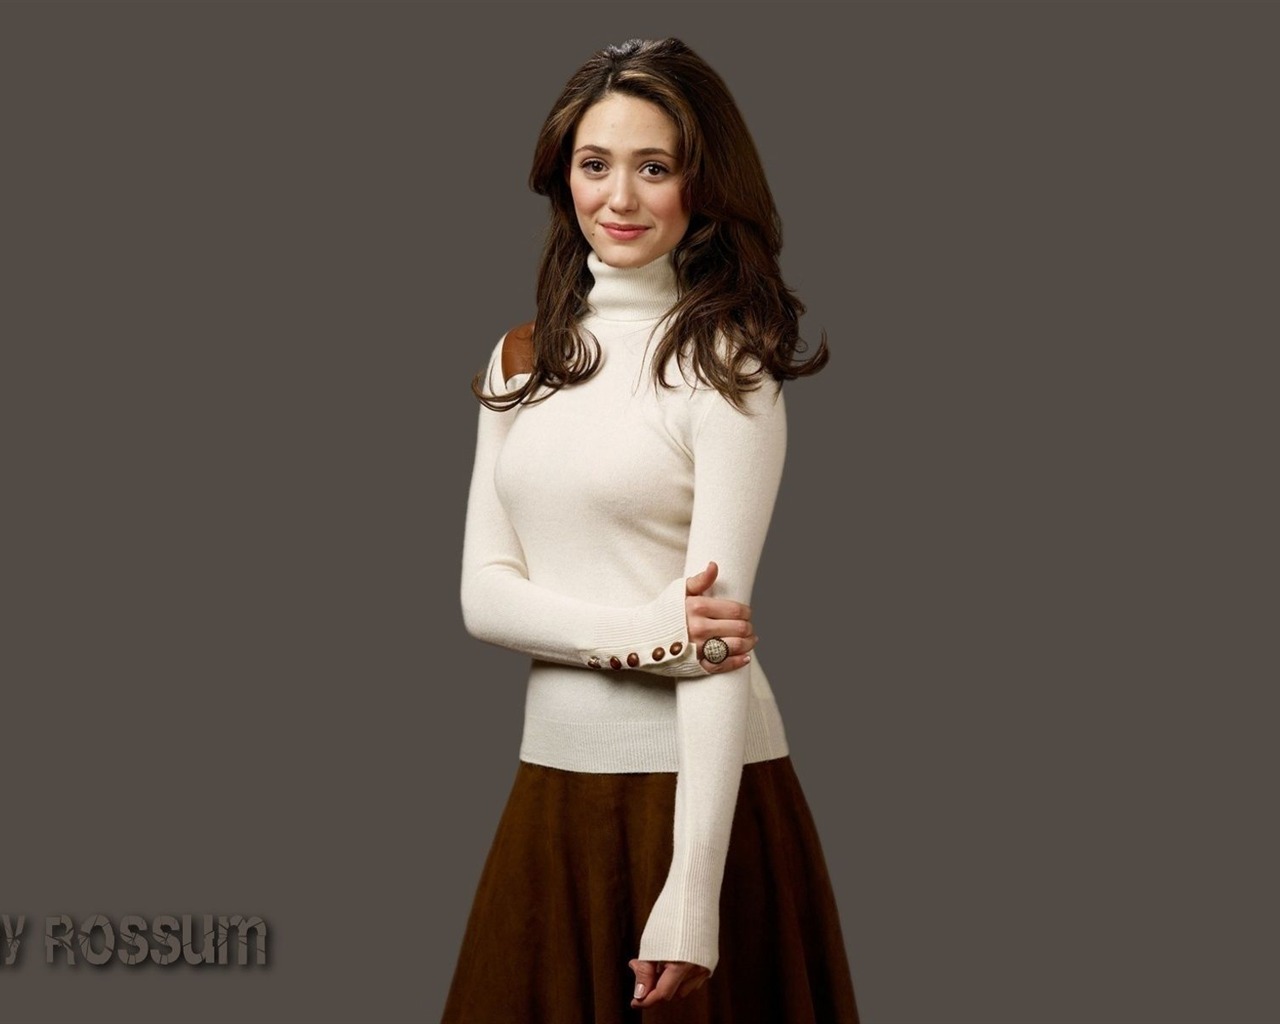 Emmy Rossum #005 - 1280x1024 Wallpapers Pictures Photos Images